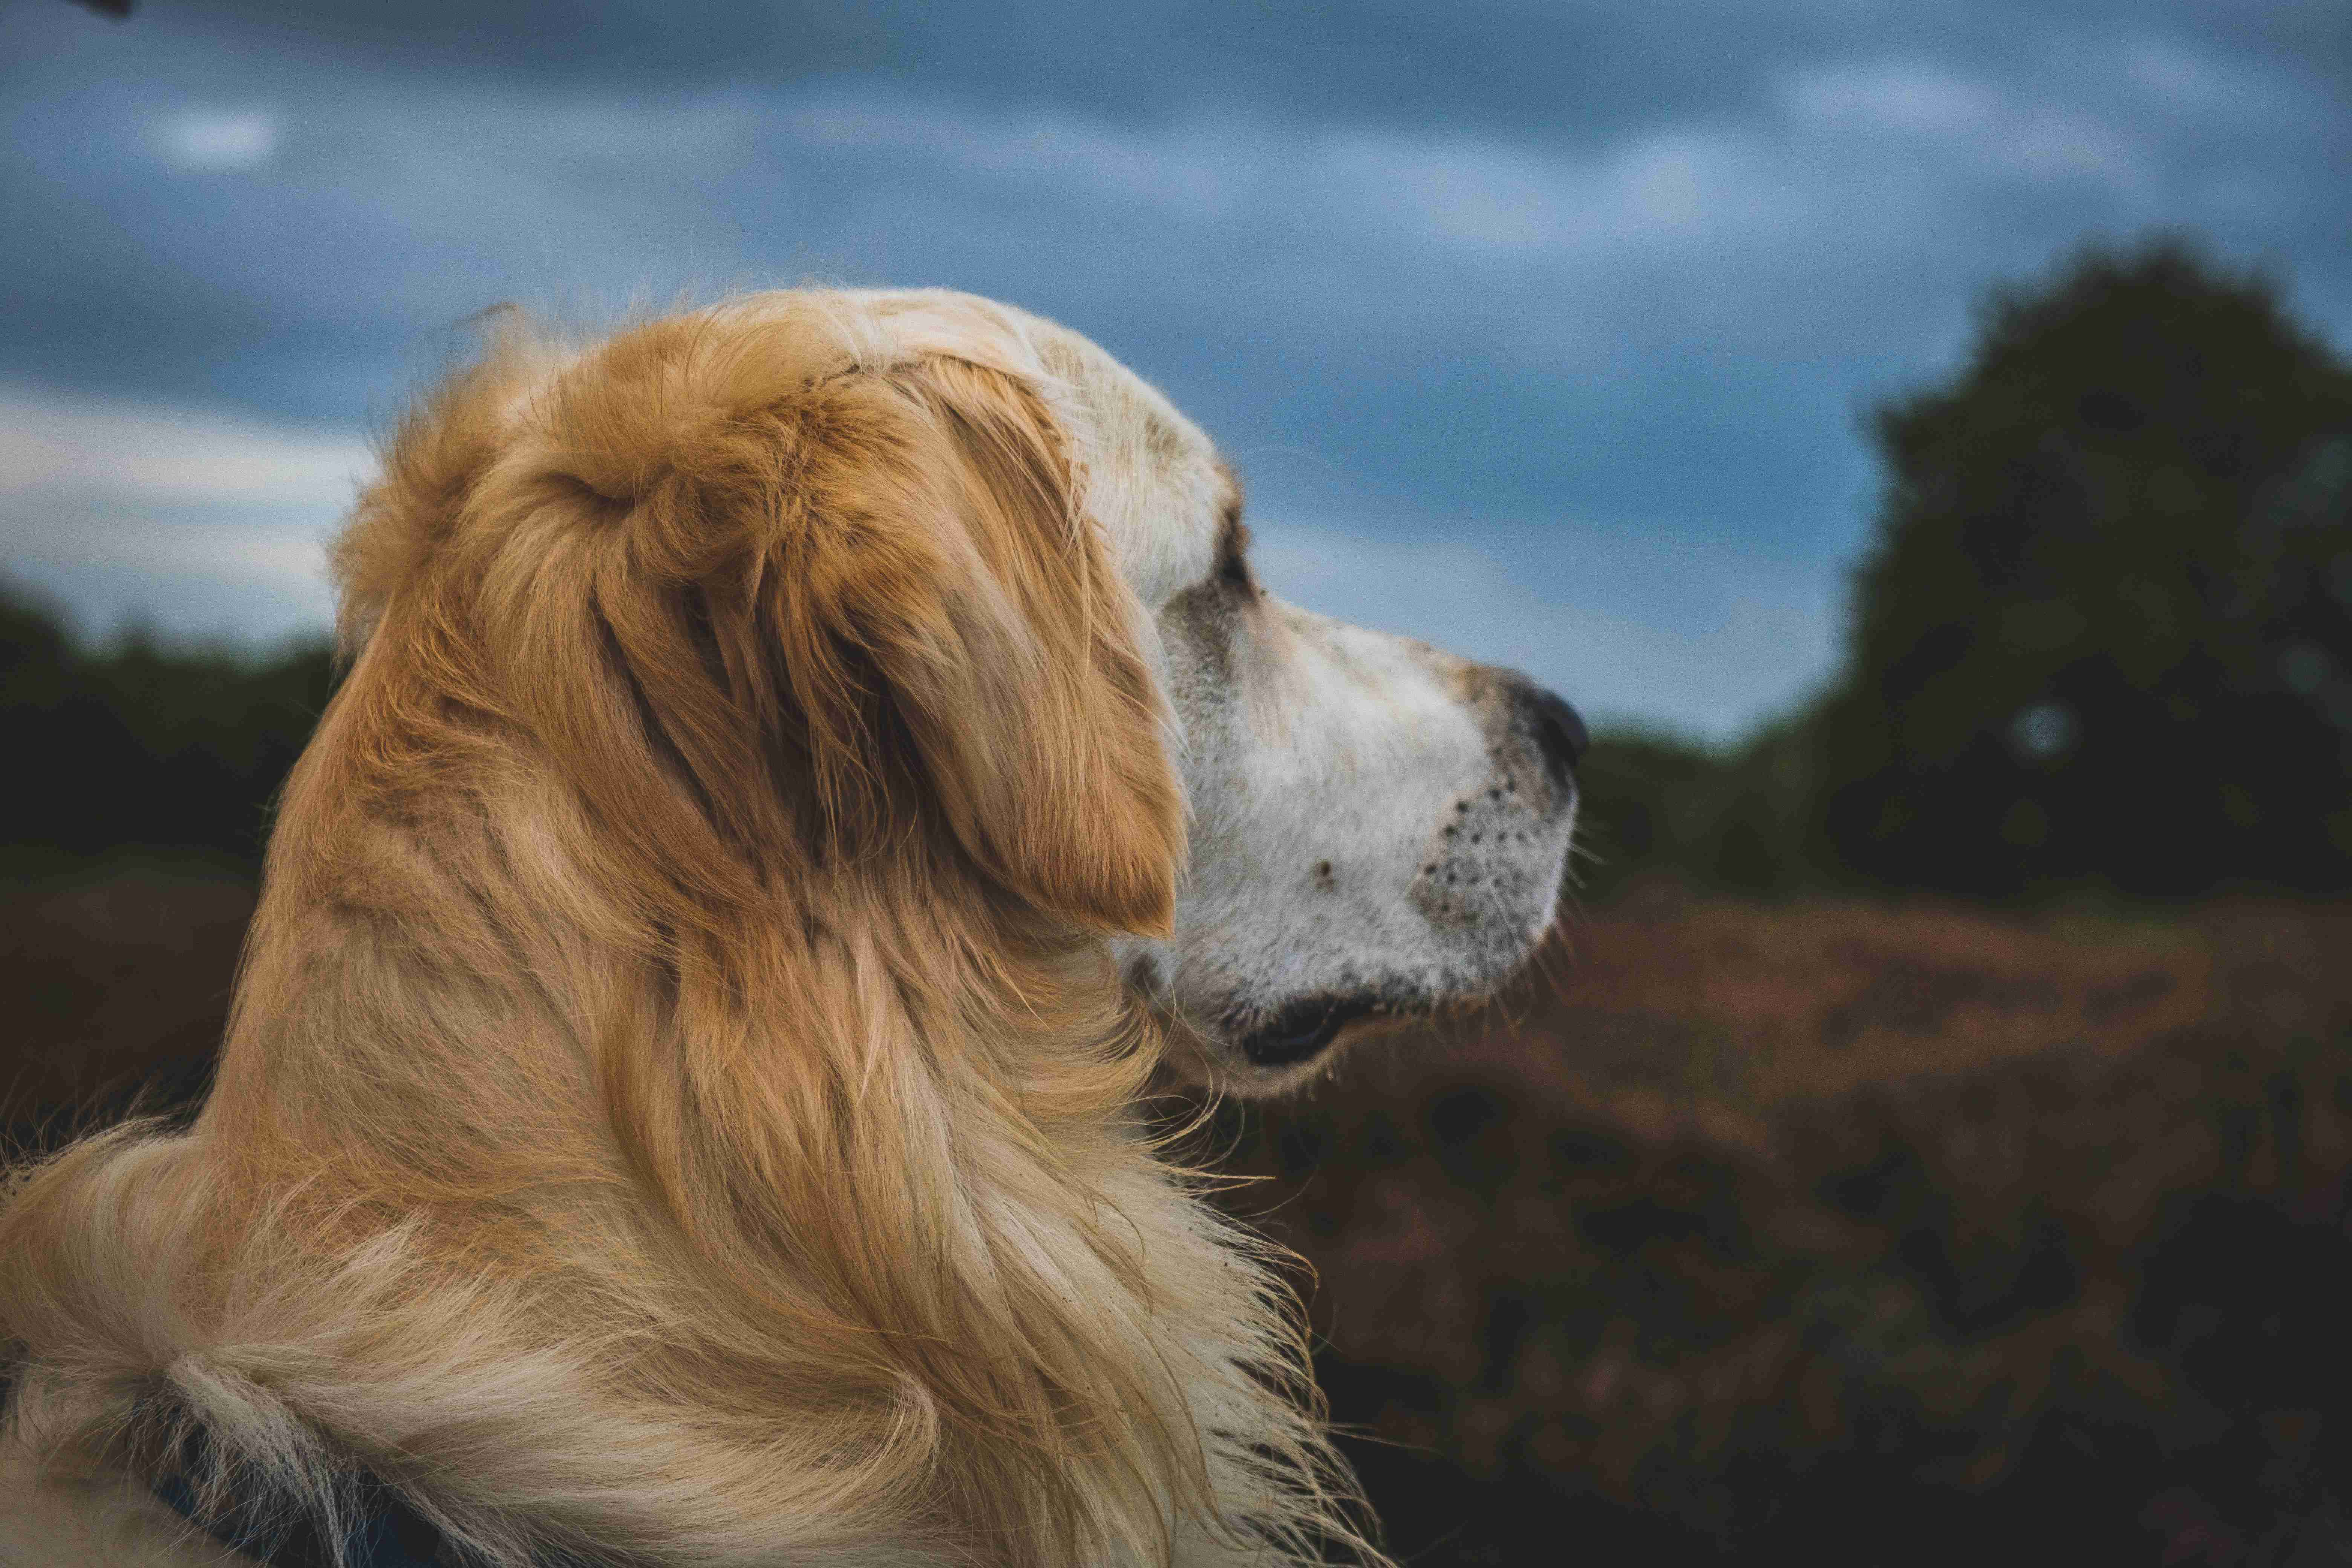 What are some recommended treats for training purposes for Golden Retrievers?